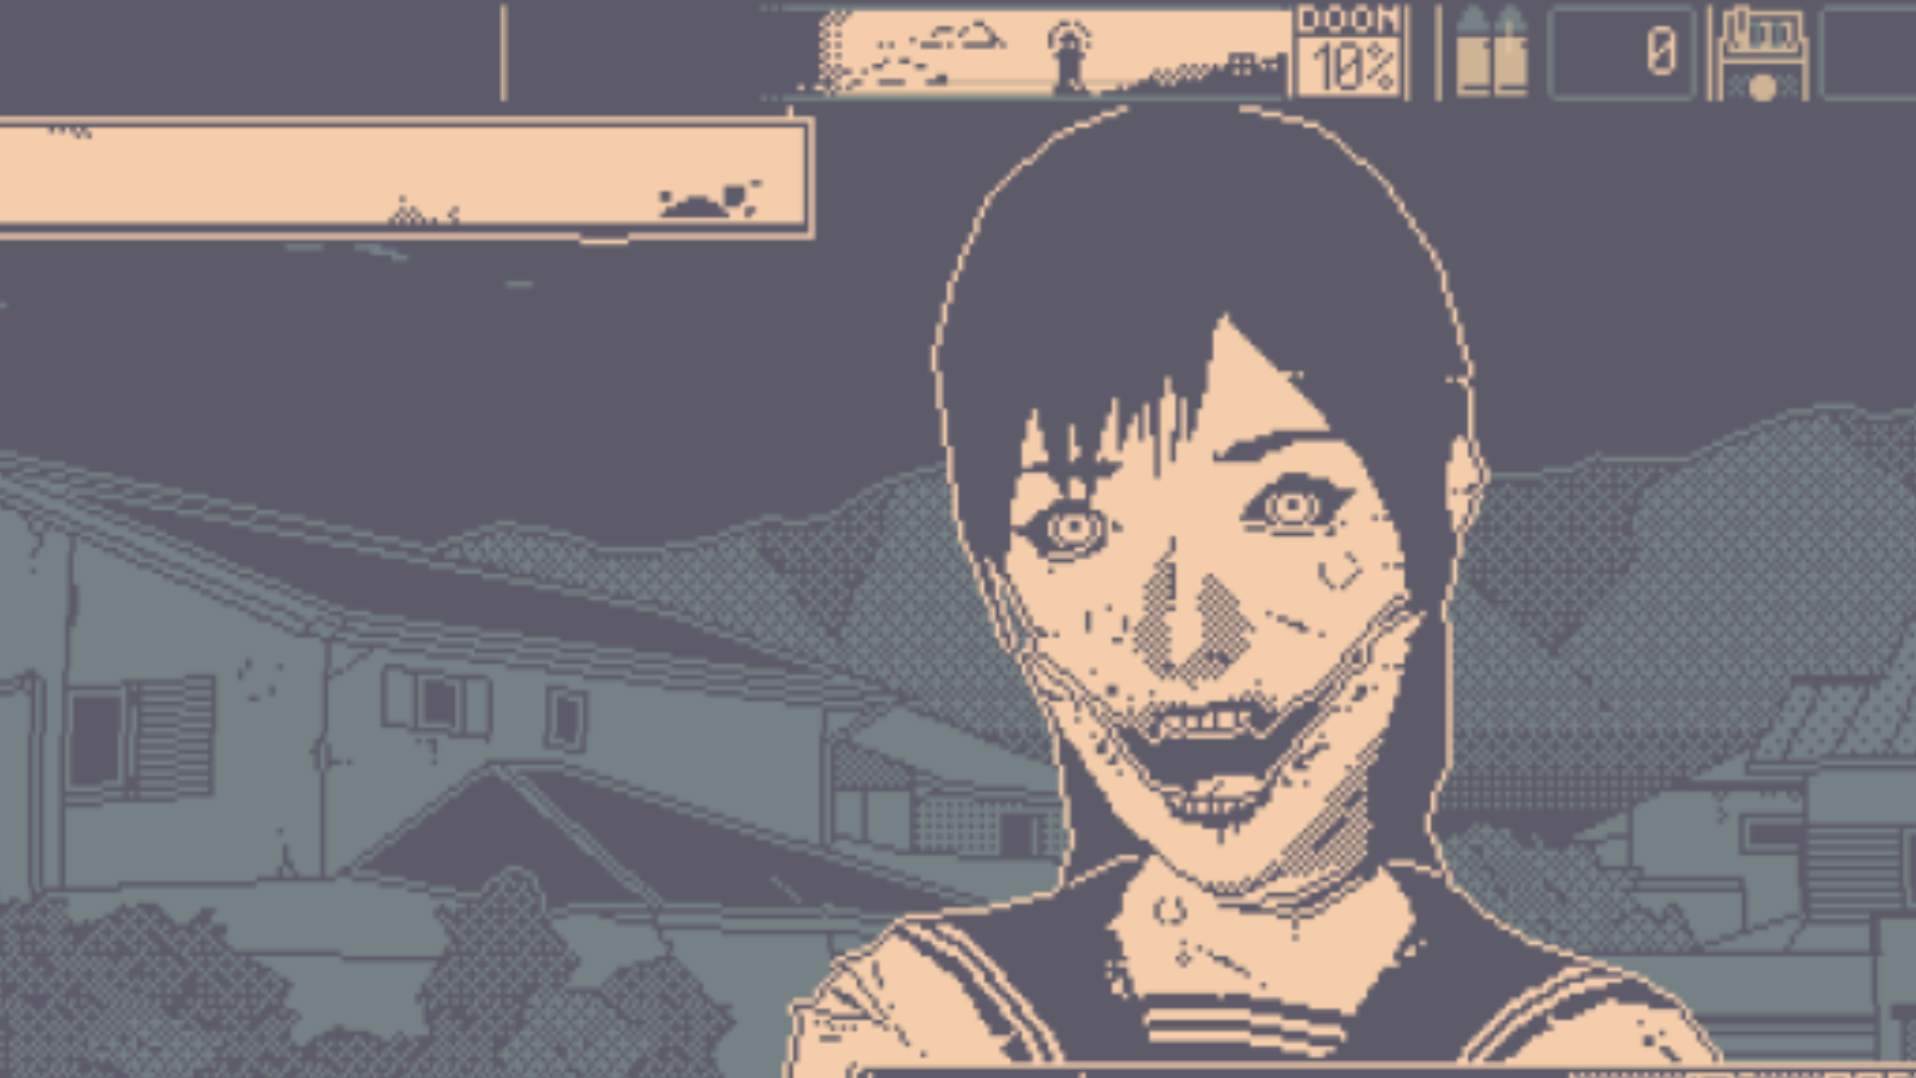 Junji Itoinspired horror game World of Horror has mysteries and